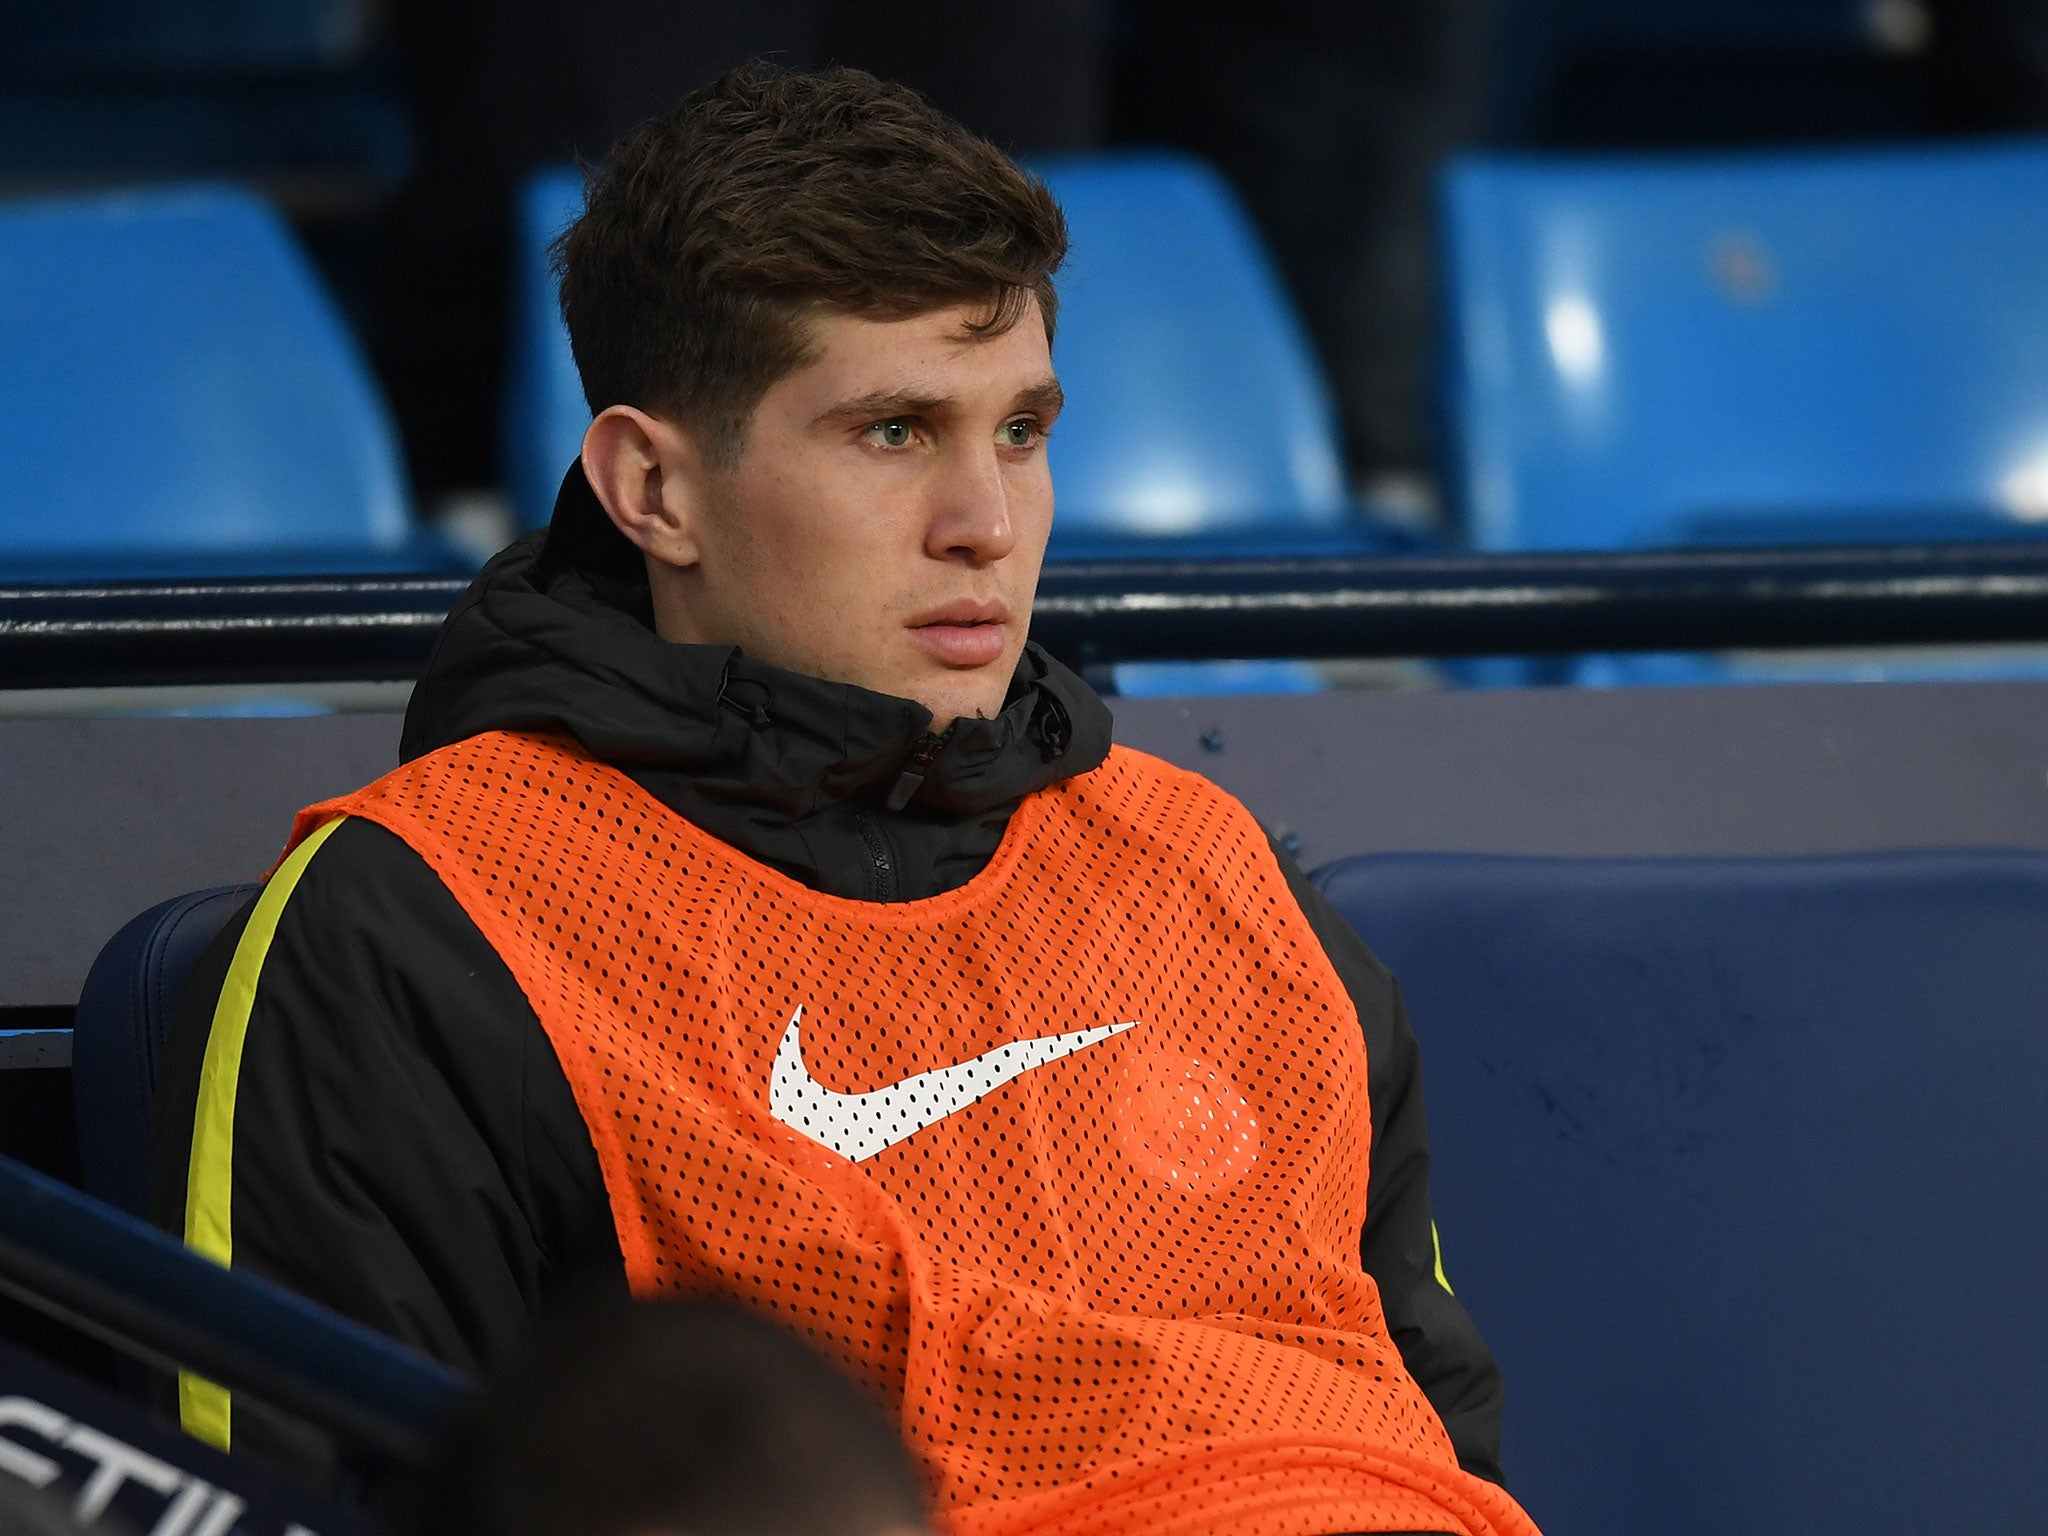 John Stones has been left on the substitutes' bench for City's recent matches